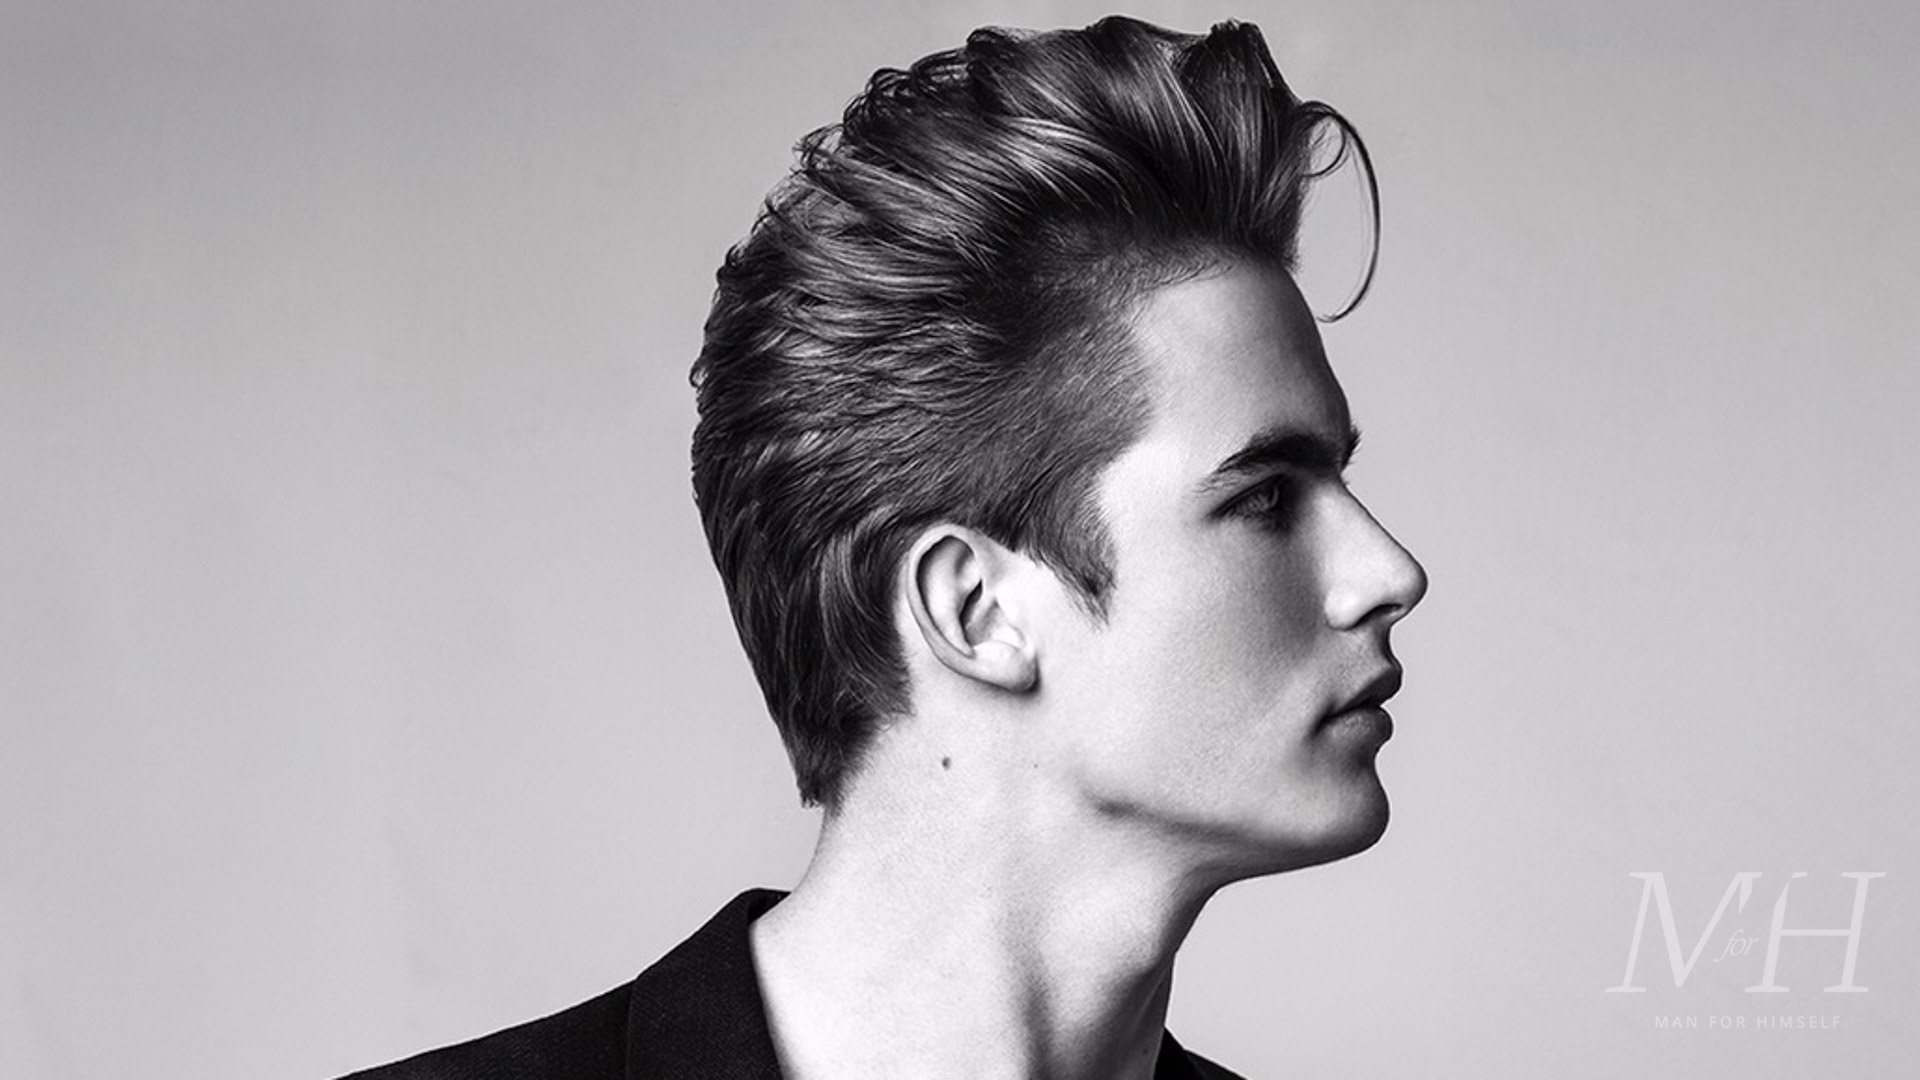 The Pompadour Hairstyle: A Modern Man's Guide To An Iconic Cut